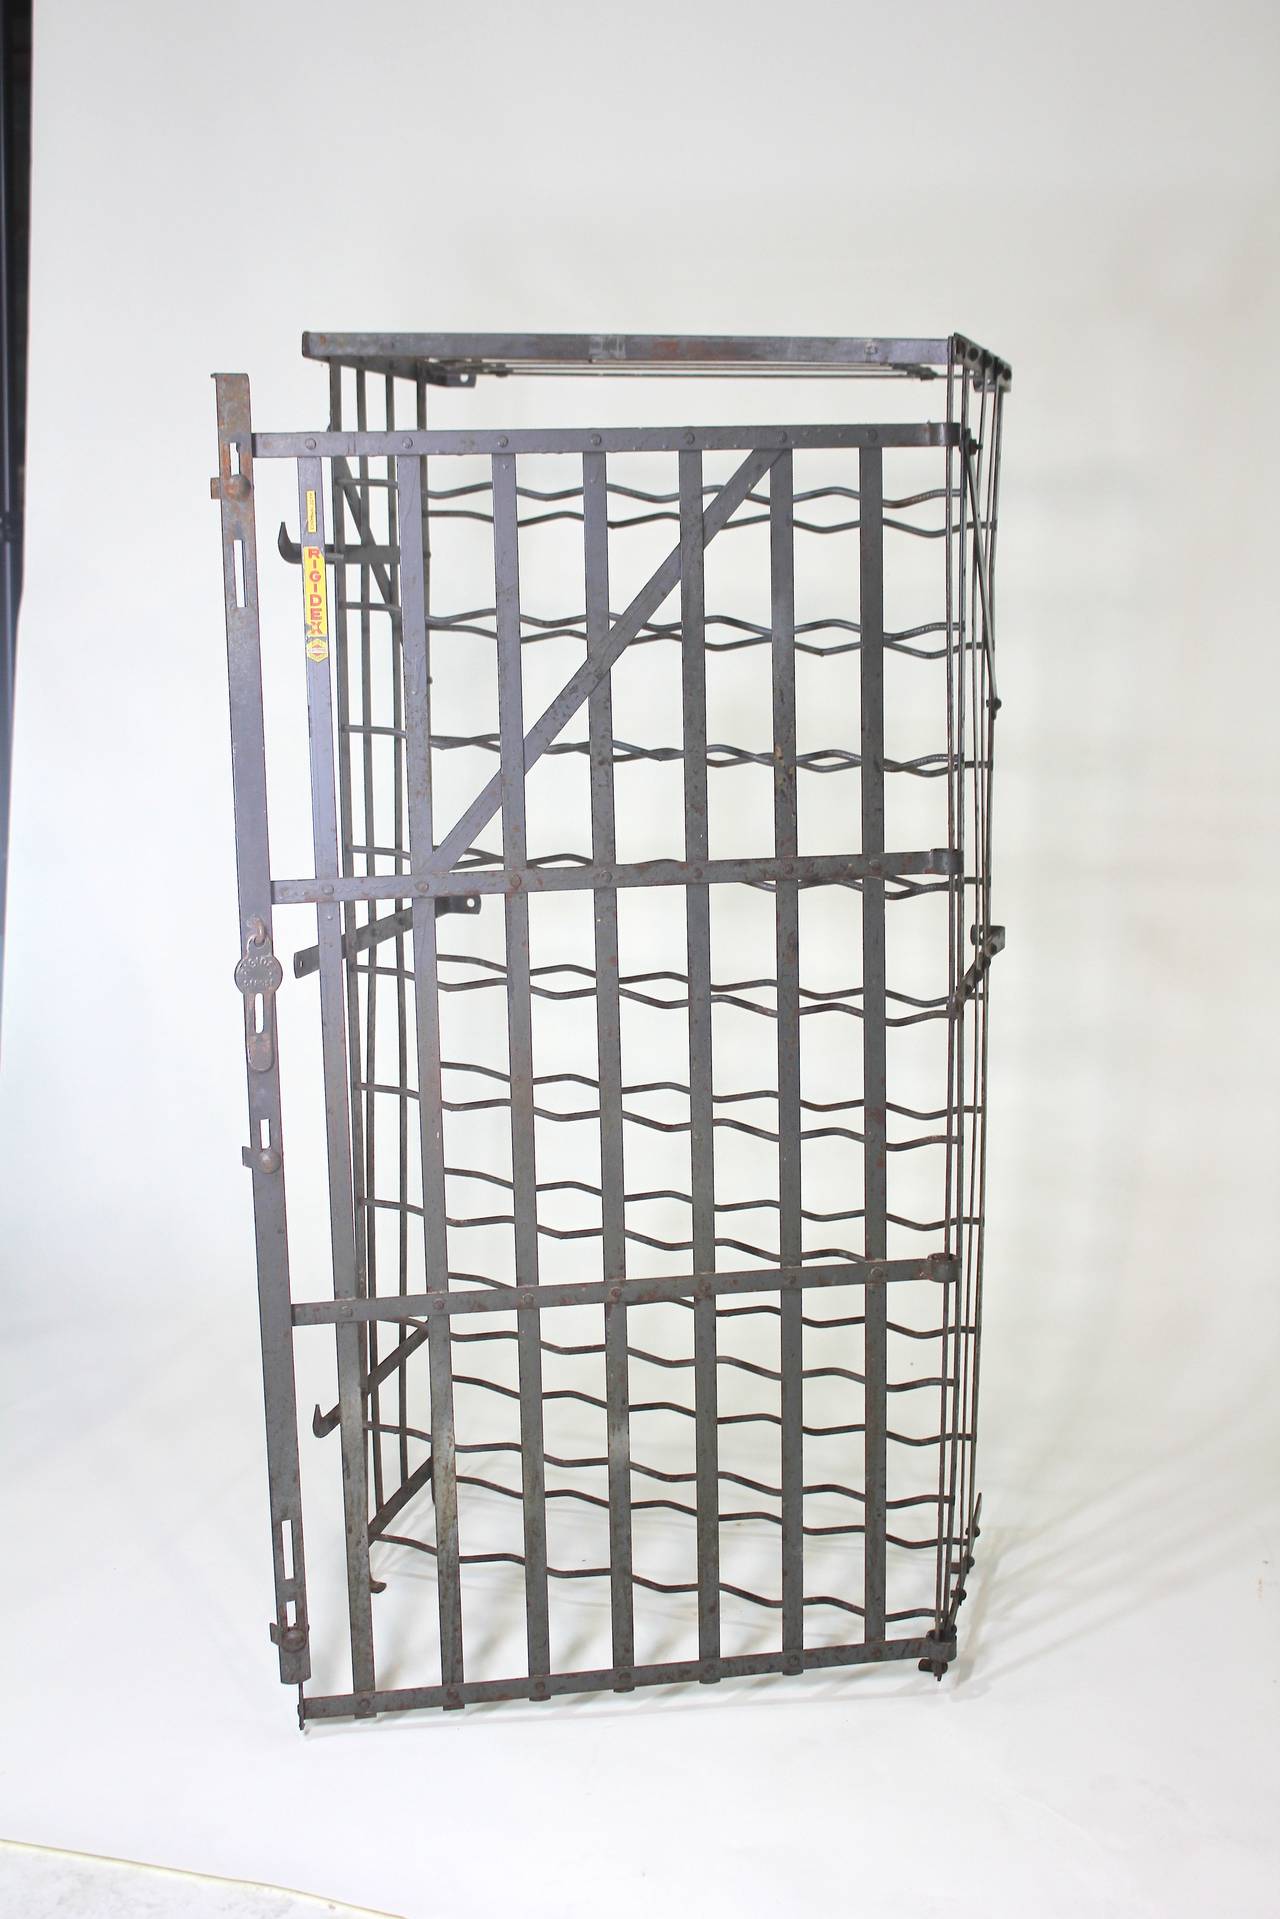 A scarce French, 50 bottle Industrial liquor and wine rack safe holder, circa 1930s in steel with lockable door, with original cool yellow label Rigidex, made in France. There are installation flanges to the rear for fastening to the wall, just add